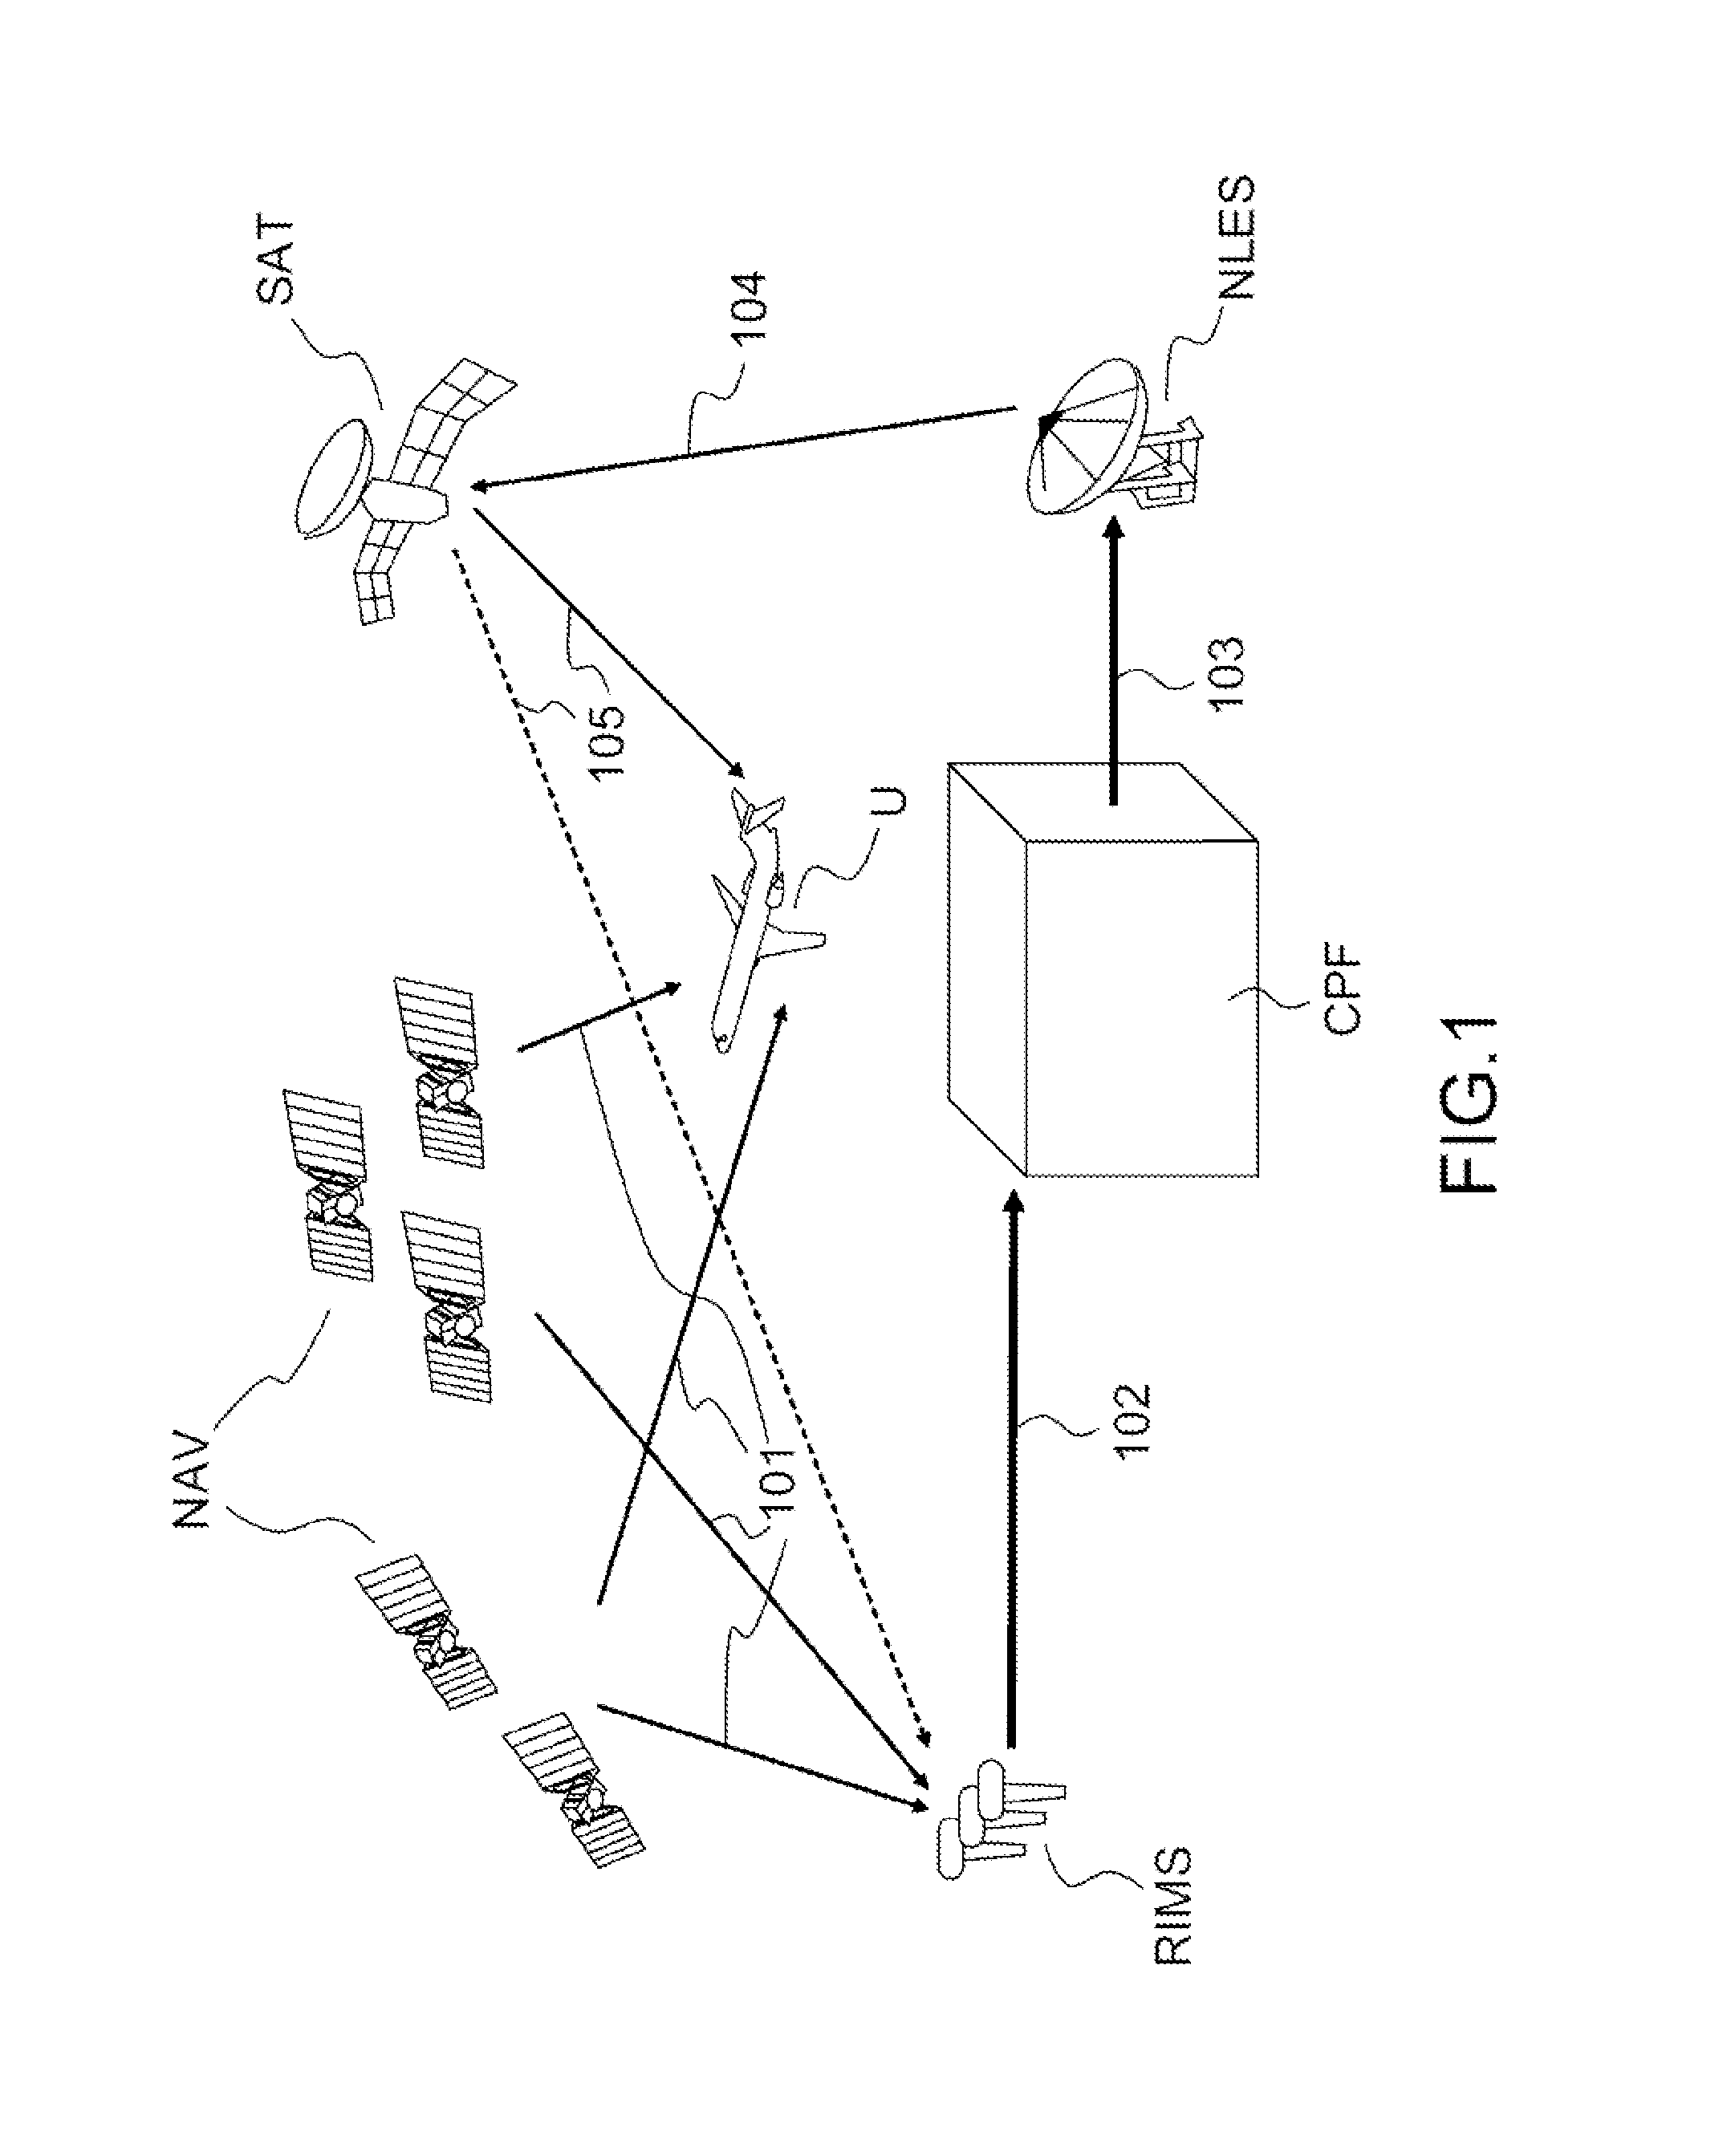 Method of monitoring the integrity of radio-navigation stations in a satellite based augmentation system